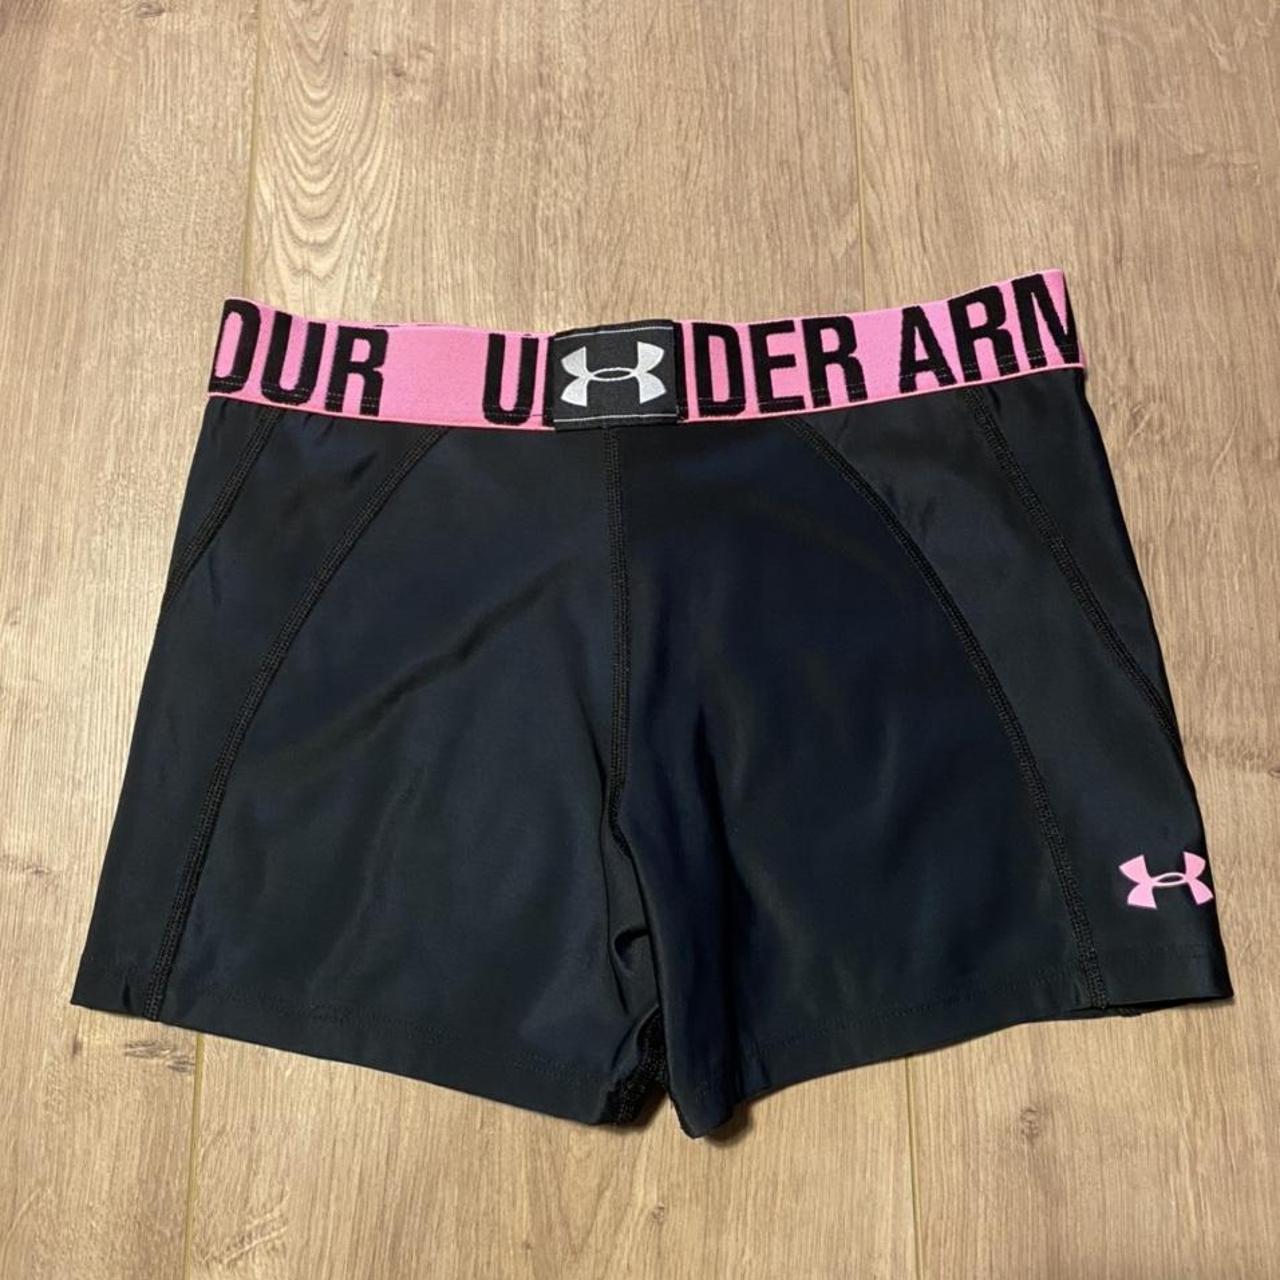 Under Armour shorts. Size small. In excellent... - Depop